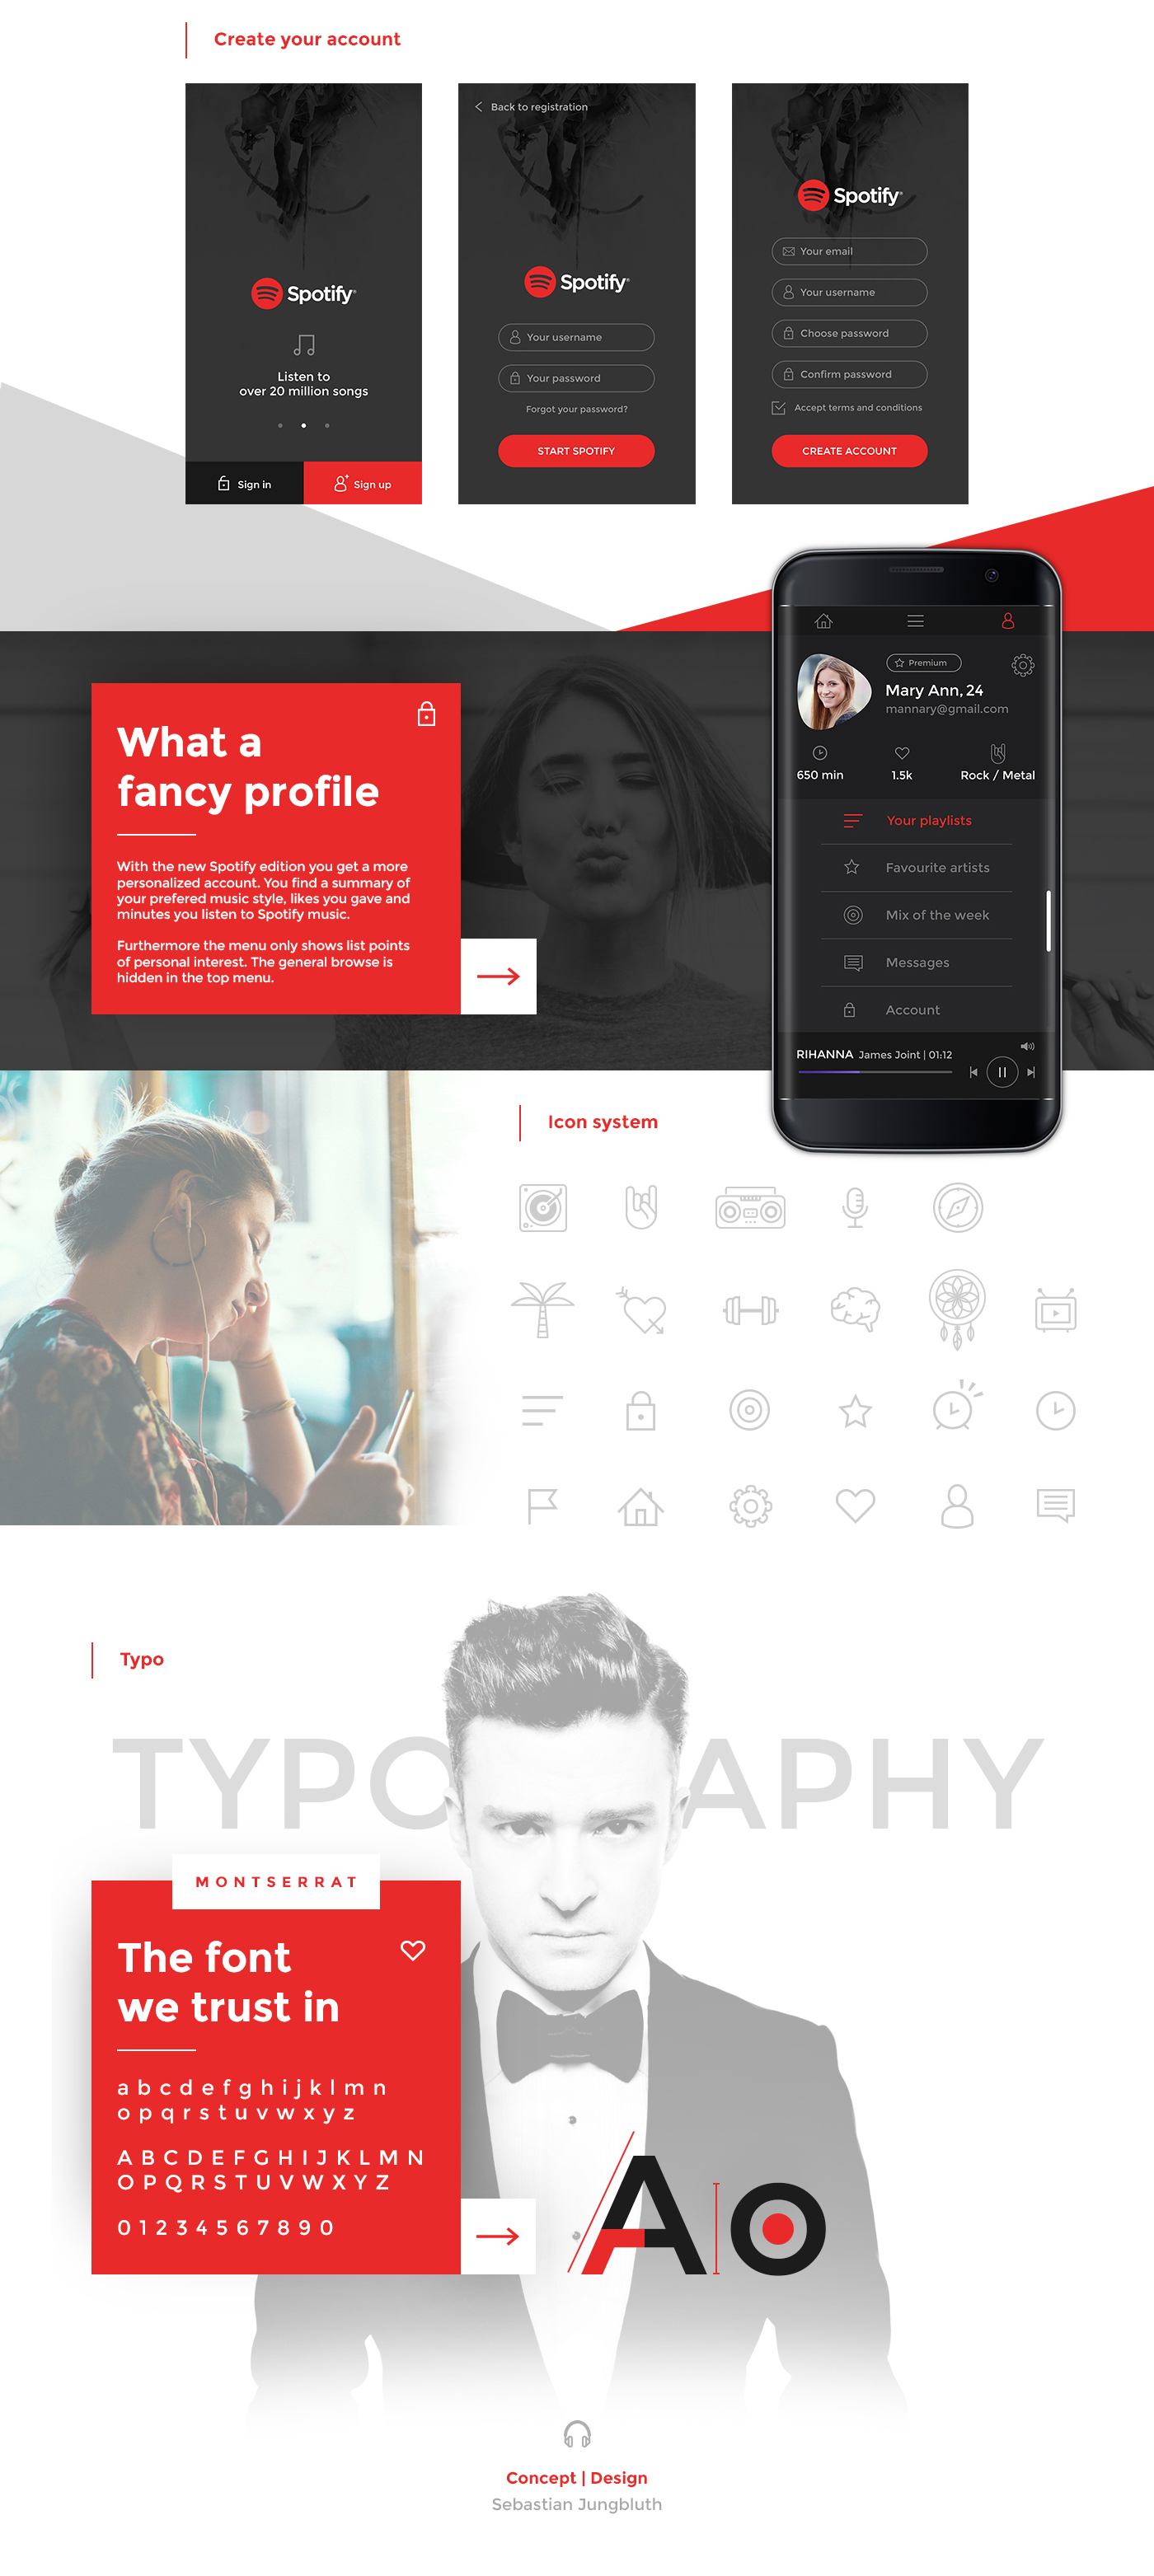 redesign photoshop Responsive Mobile app application UX design gradient colors spotify Music Player mobile interface